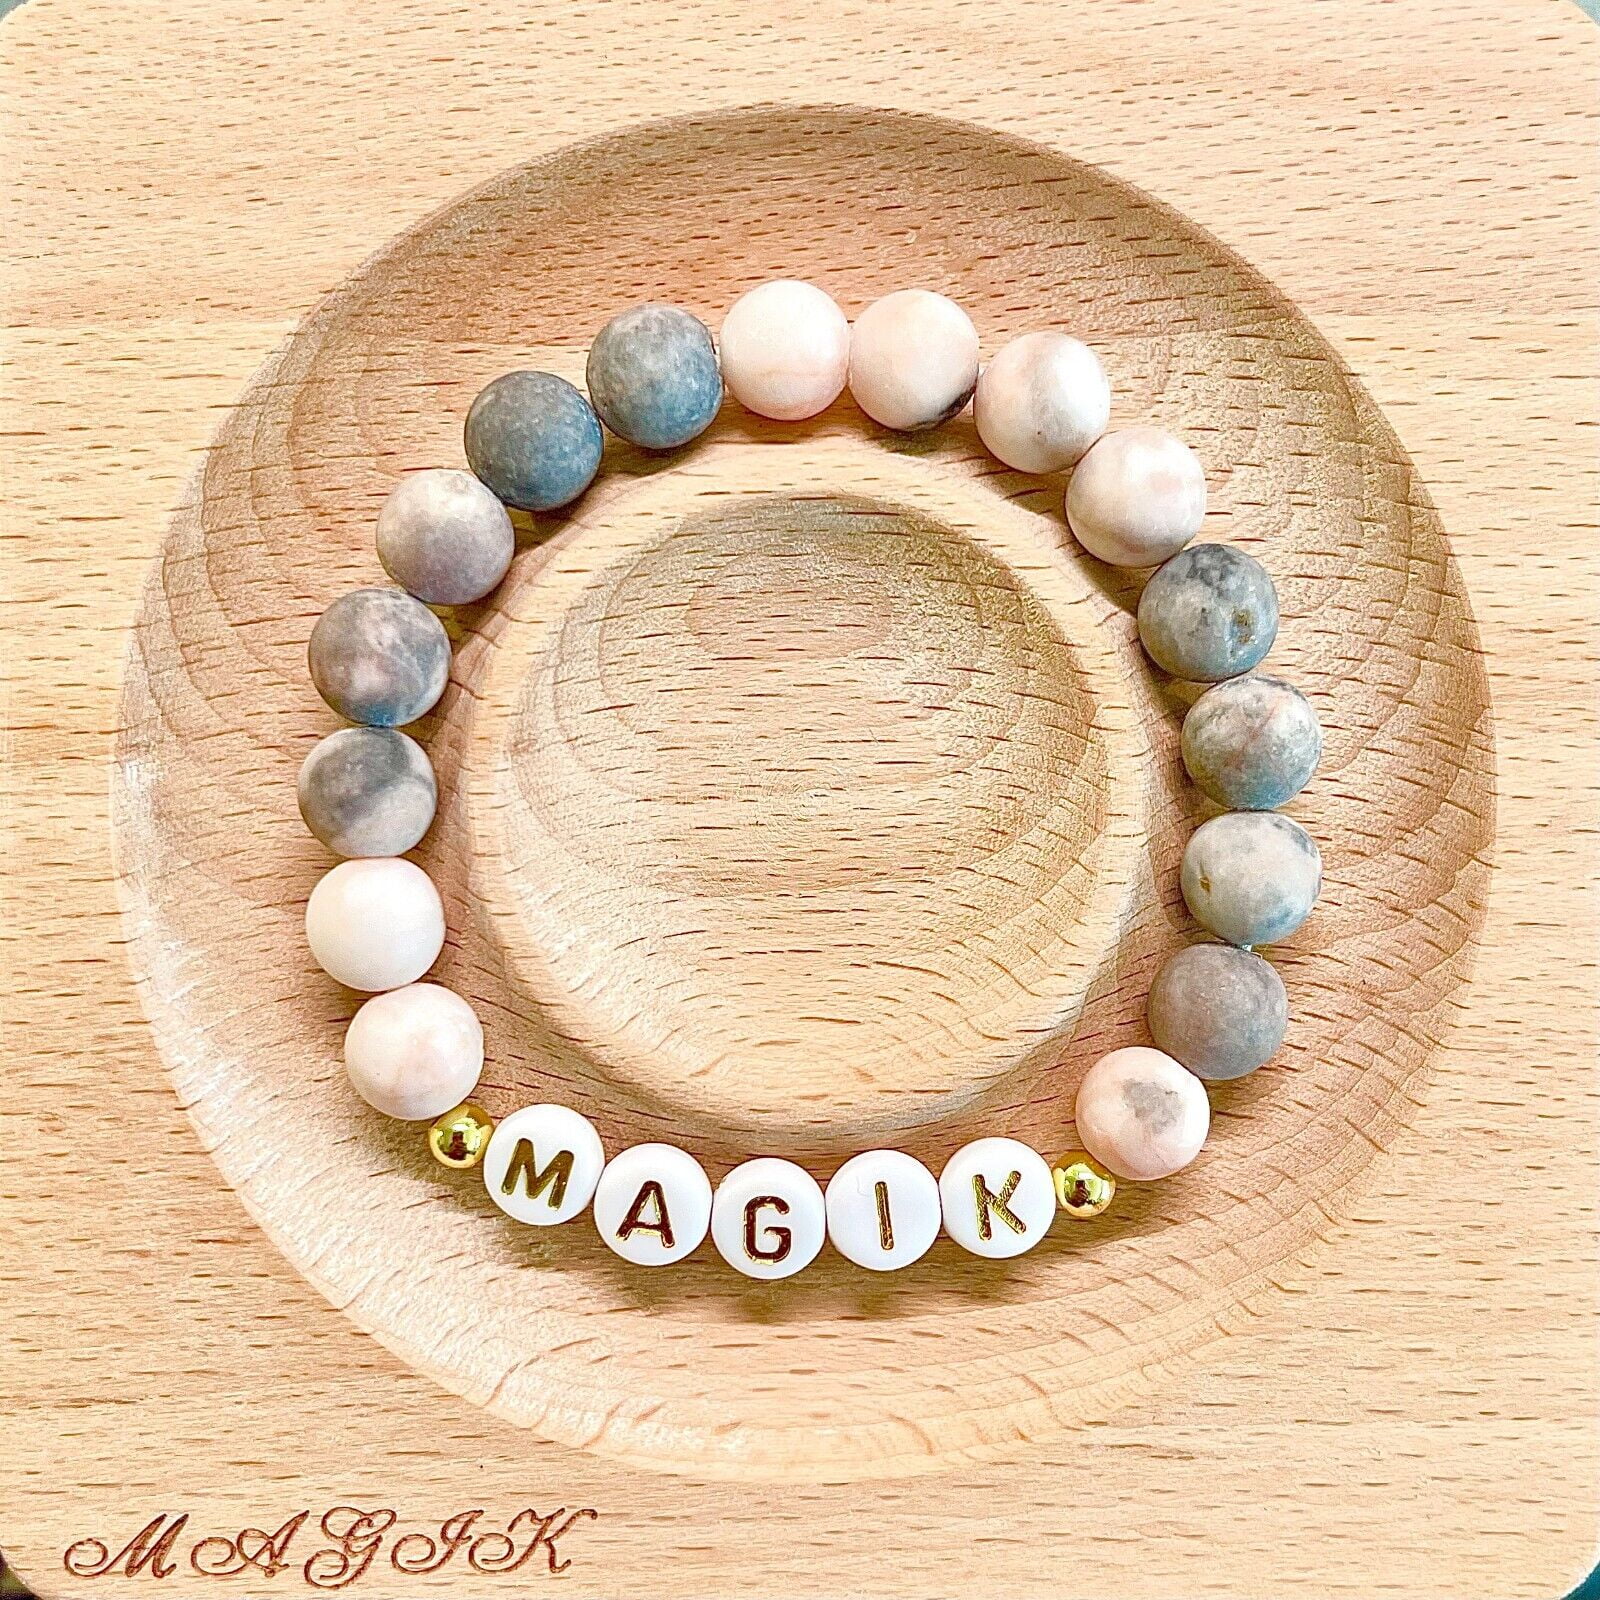 Magik Personalized Custom Name Bracelet Initials Letter Bead Beaded Stretch  Mama Bracelets Alphabet Energy Stone Agate Howlite Holiday Special Gifts